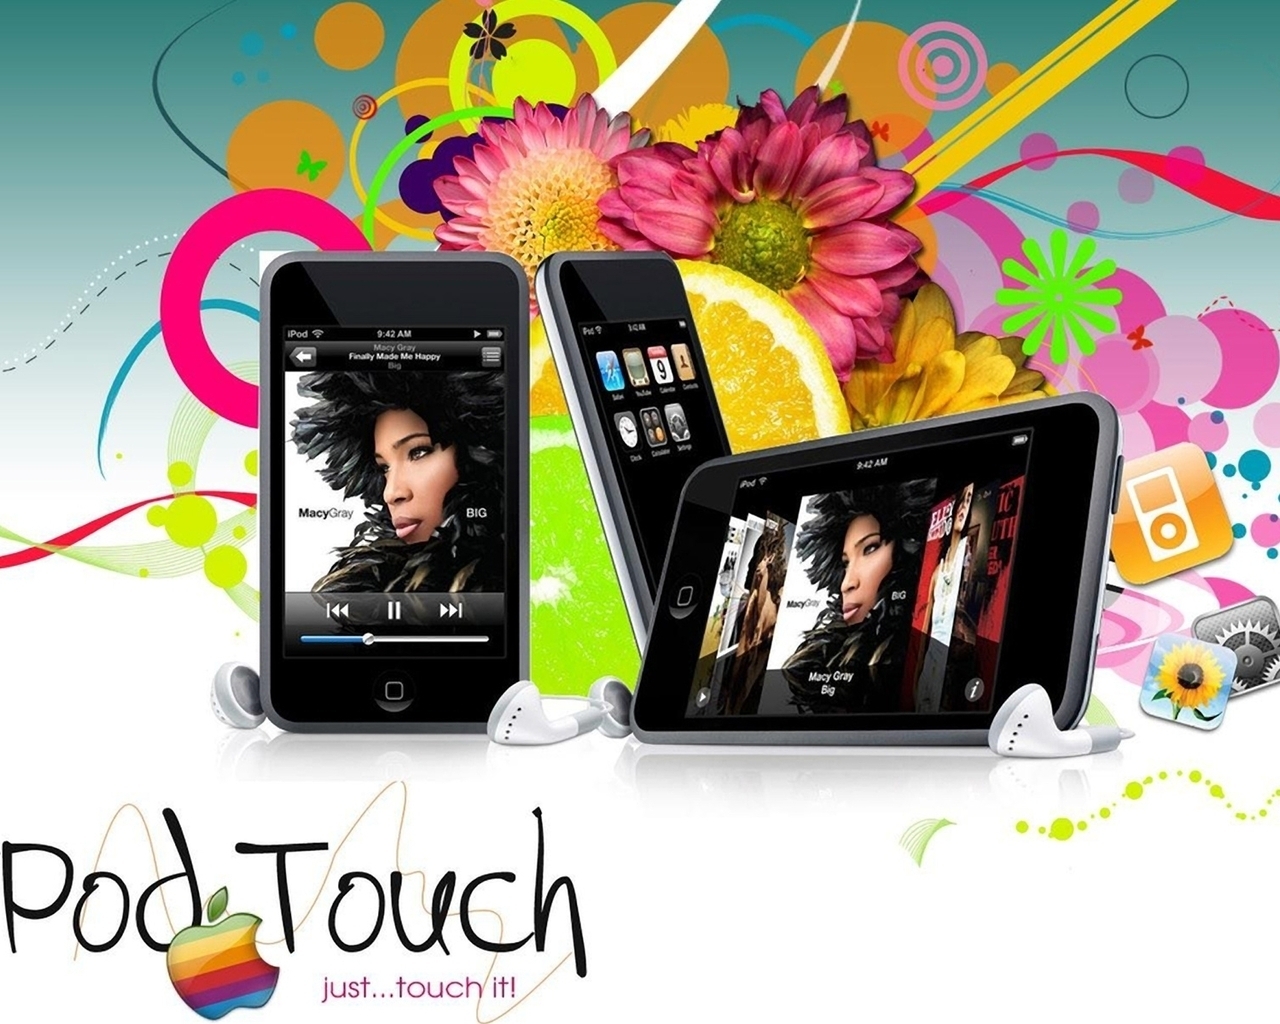 Cool iPod Touch for 1280 x 1024 resolution